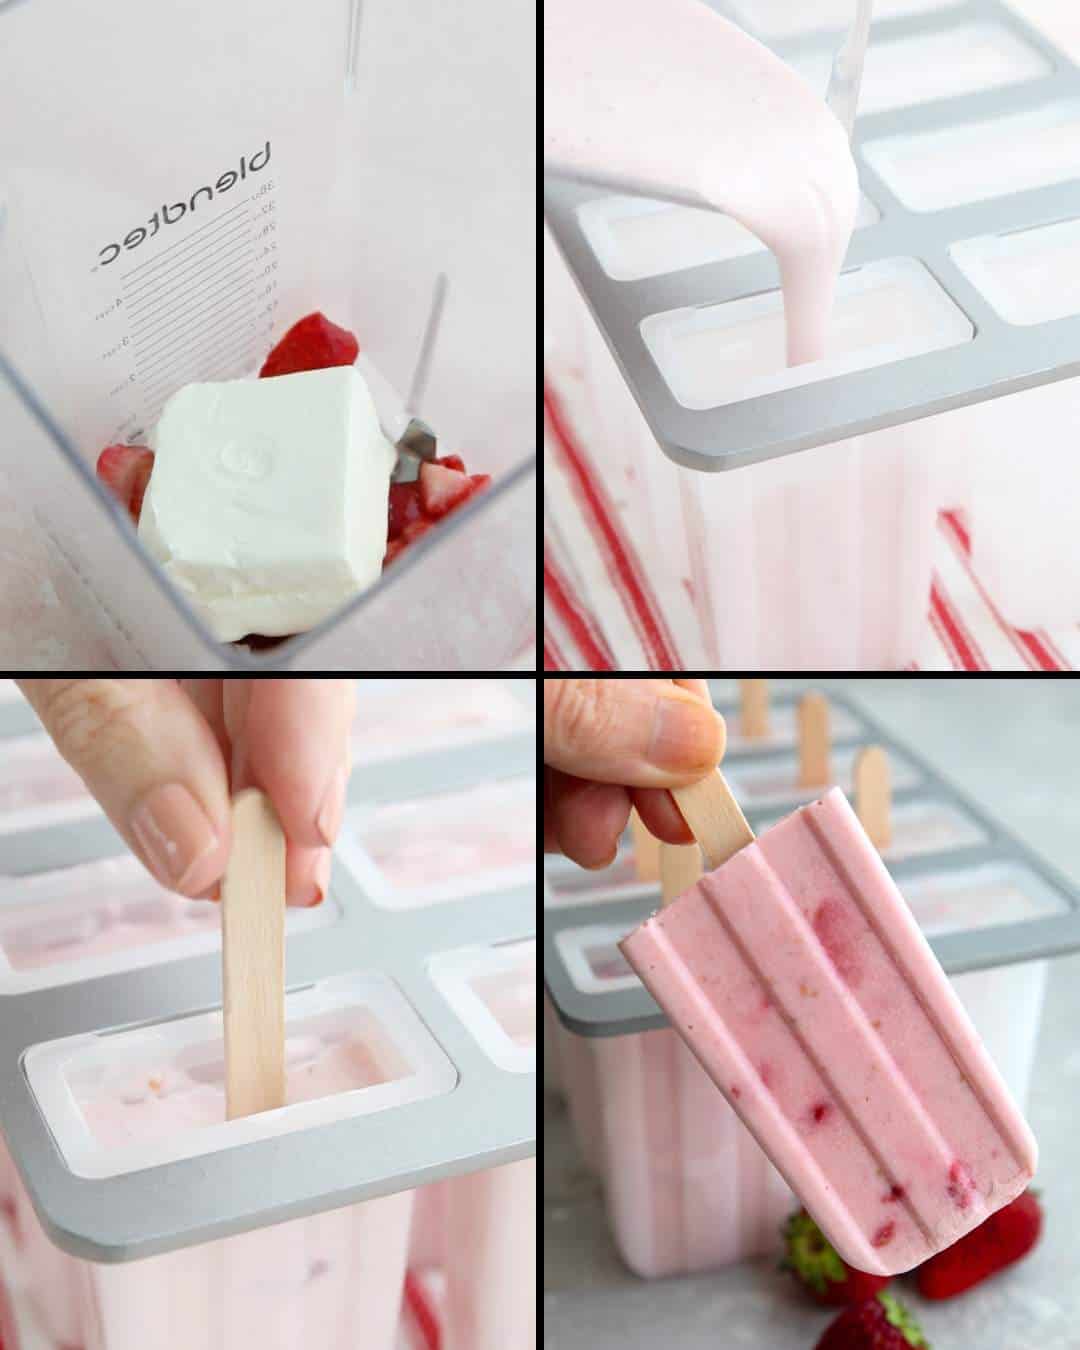 A collage of 4 images showing the steps for making keto popsicles.